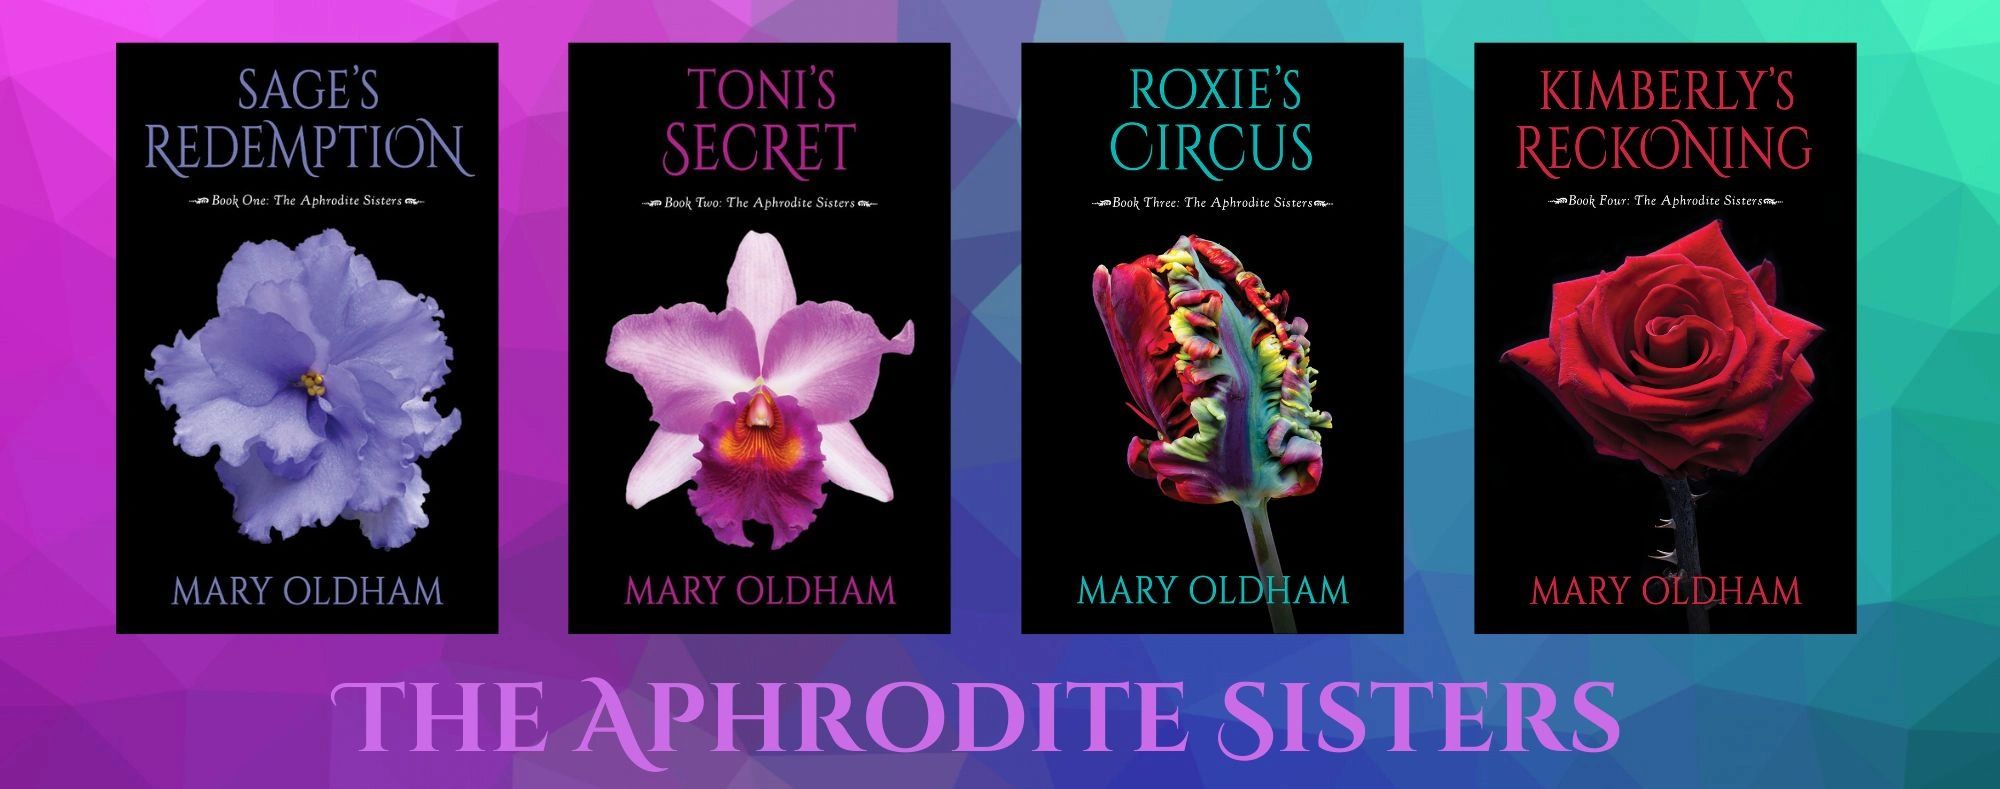 The Aphrodite Sisters Series by Mary Oldham